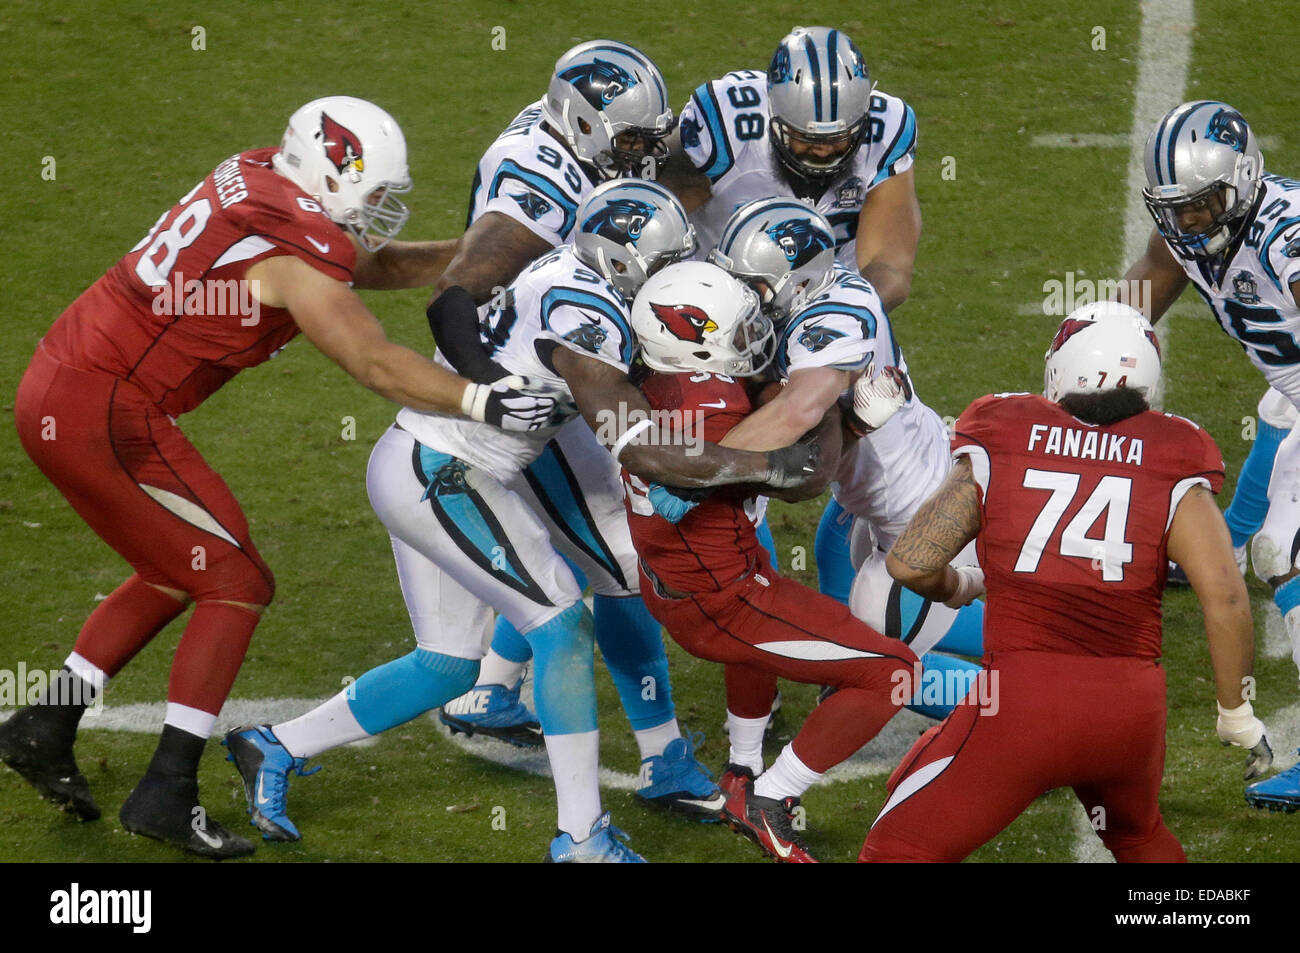 Charlotte, NC, USA. 3rd Jan, 2015. The Carolina Panthers defense swarms Arizona Cardinals running back Kerwynn Williams #33 in the NFC wildcard game on January 3, 2015, at Bank of America Stadium in Charlotte, North Carolina. The Panthers defeated the Cardinals 27-16. Margaret Bowles/CSM/Alamy Live News Stock Photo